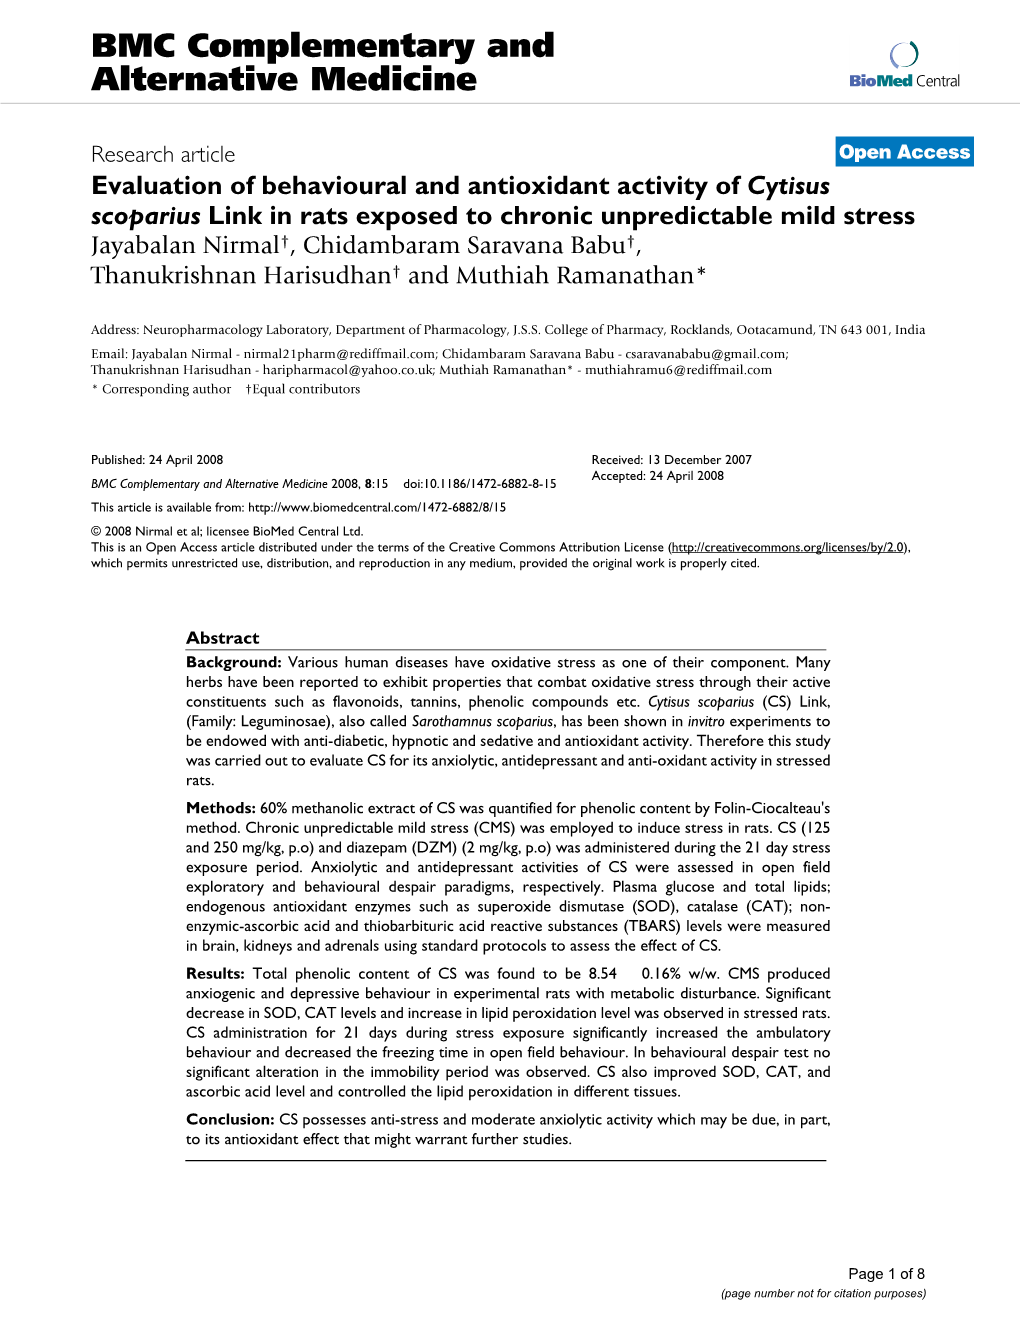 Evaluation of Behavioural and Antioxidant Activity of Cytisus